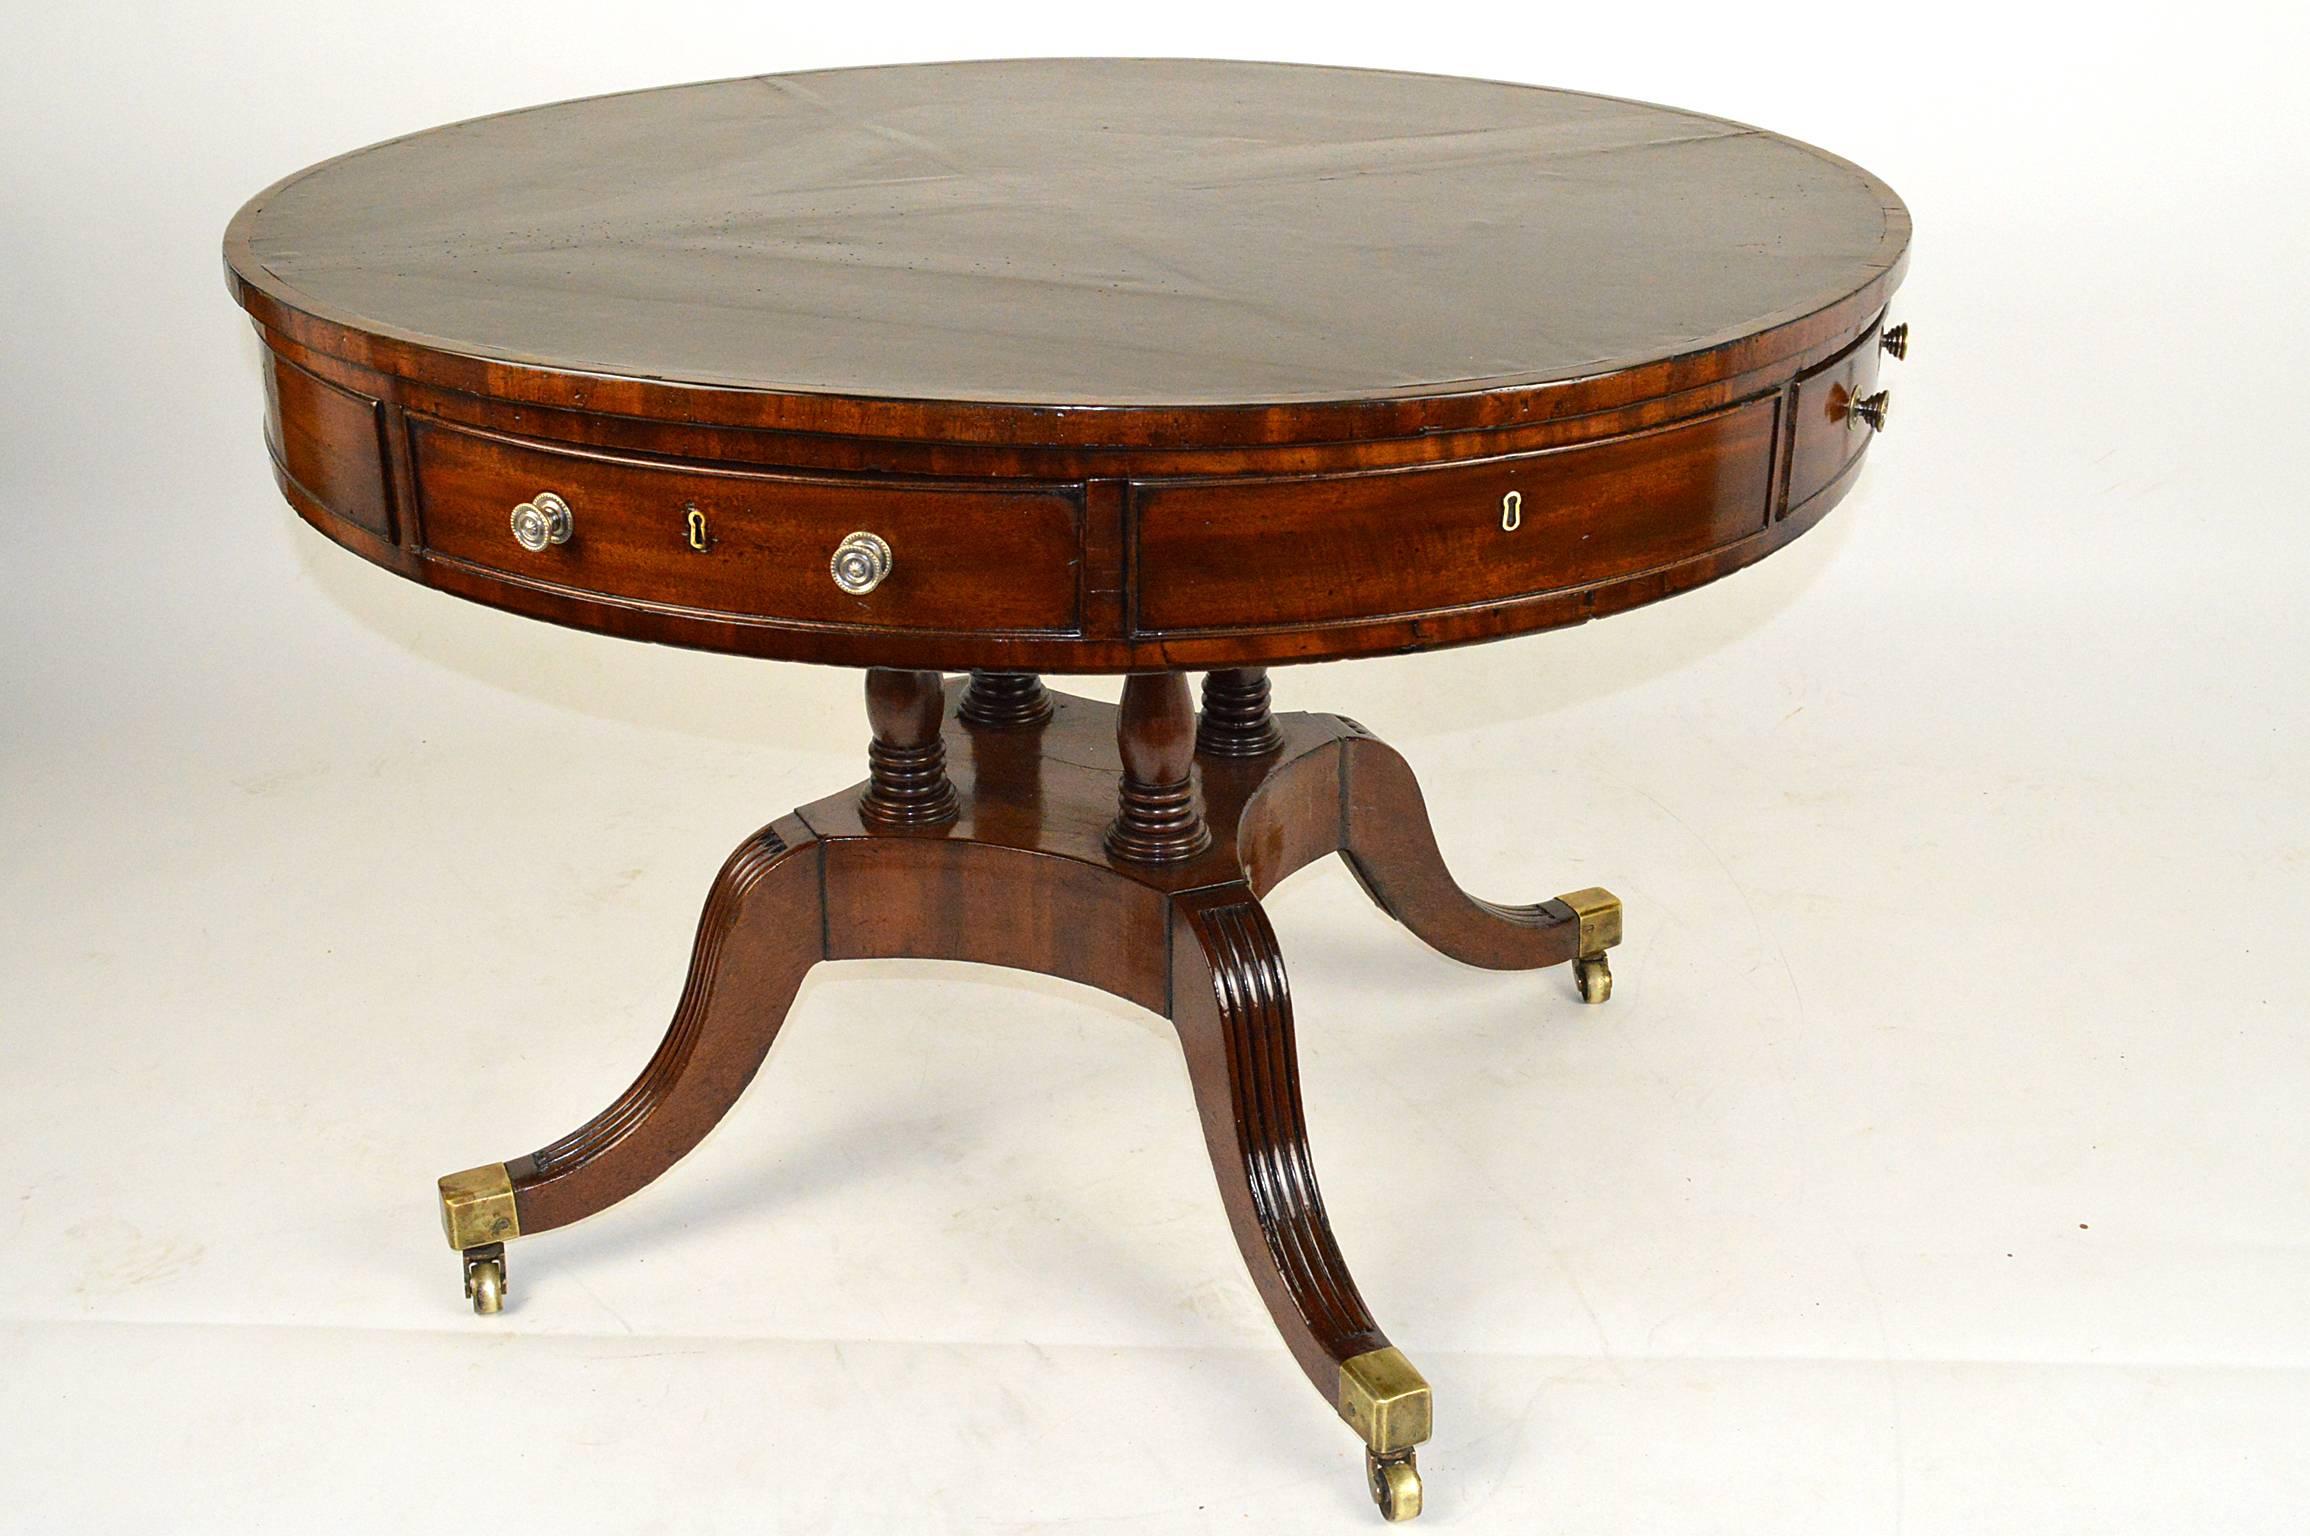 Regency English Mahogany Inlaid Leather Top Rent/Drum Table For Sale